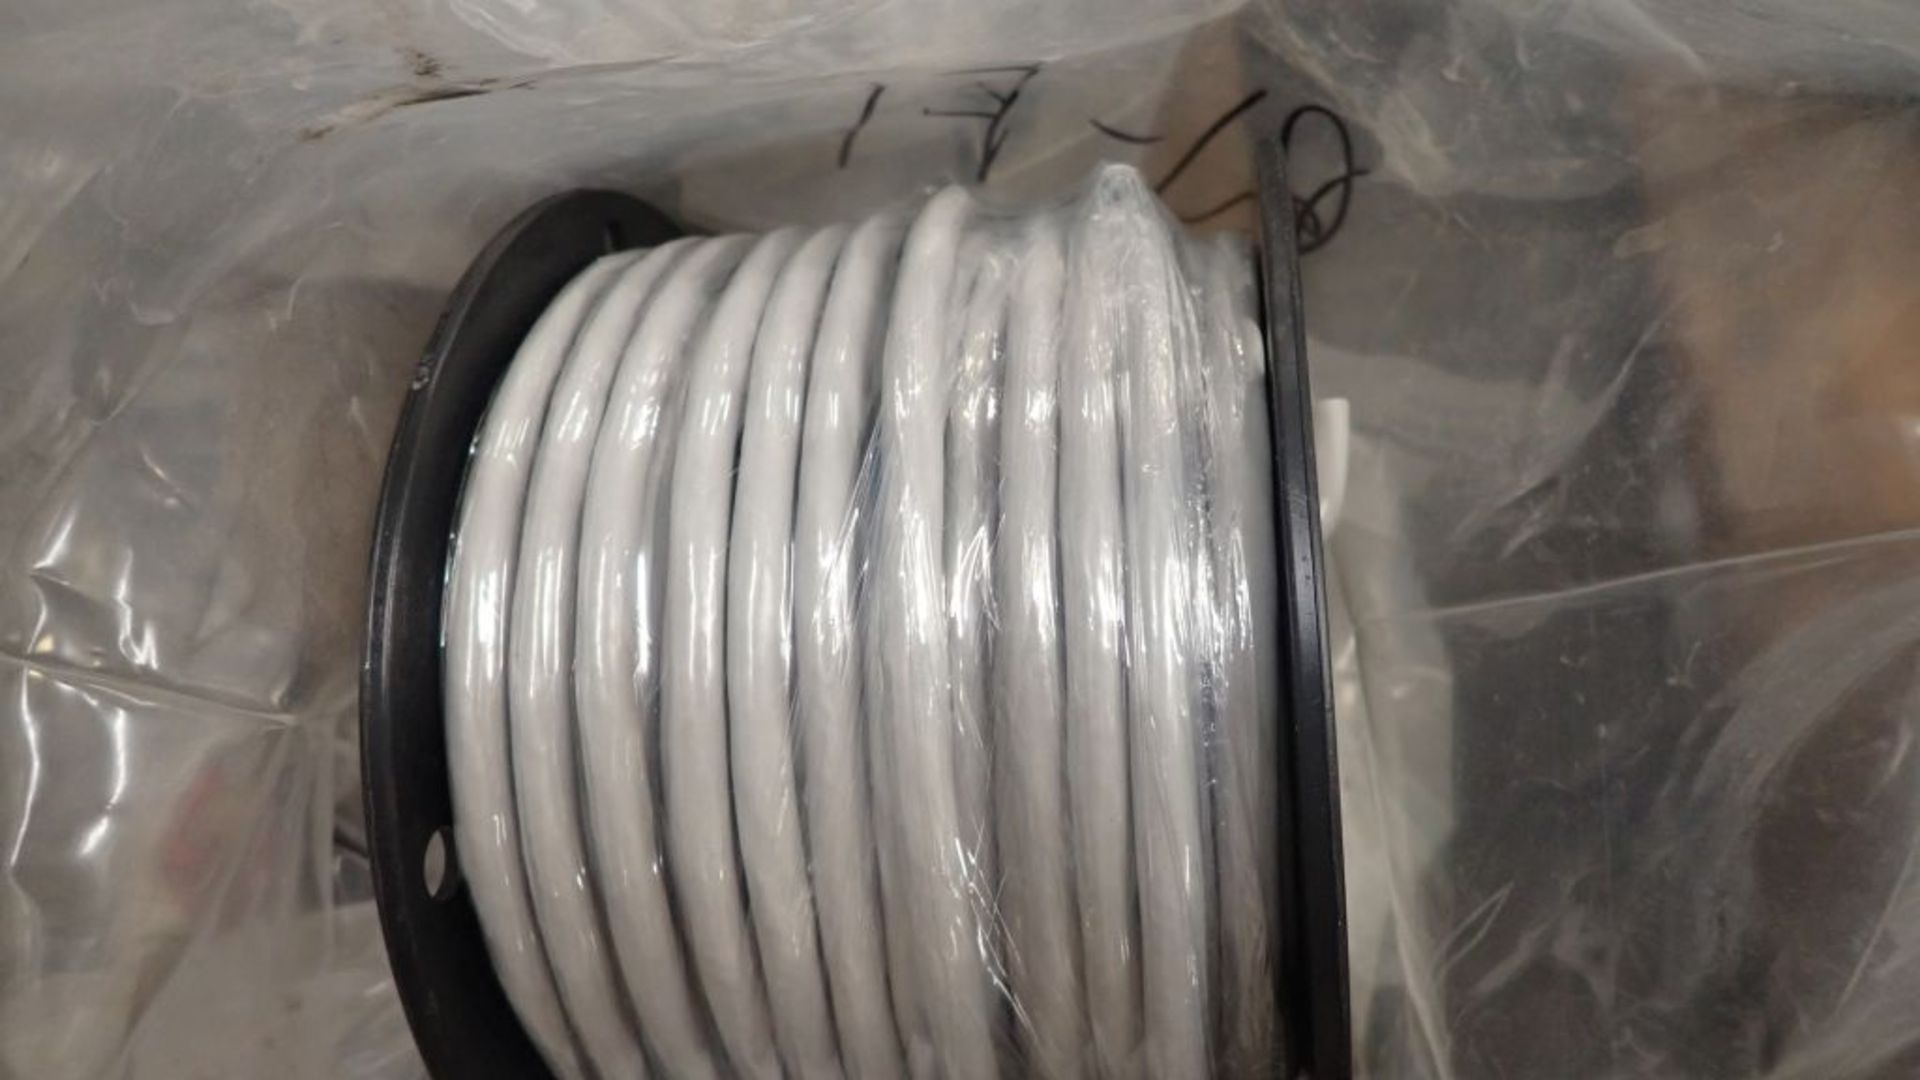 Lot of (12) Assorted Gray Cables | (4) 100' Item No. 03151-9100-0100; (8) 50' Item No. 03151-9100- - Image 7 of 7